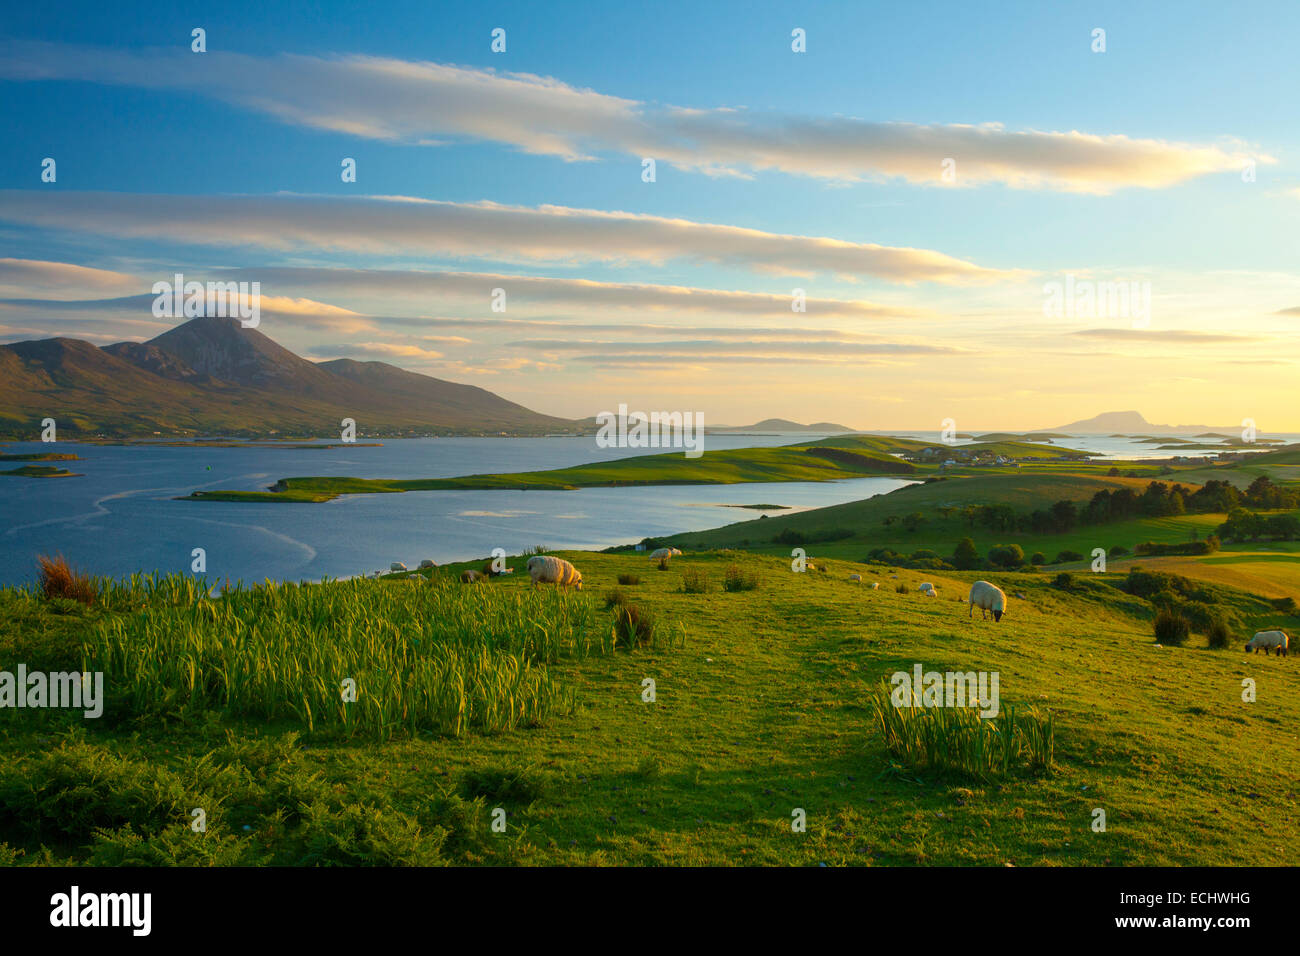 Sheep grazing beneath Croagh Patrick on the shore of Clew Bay, County Mayo, Ireland. Stock Photo